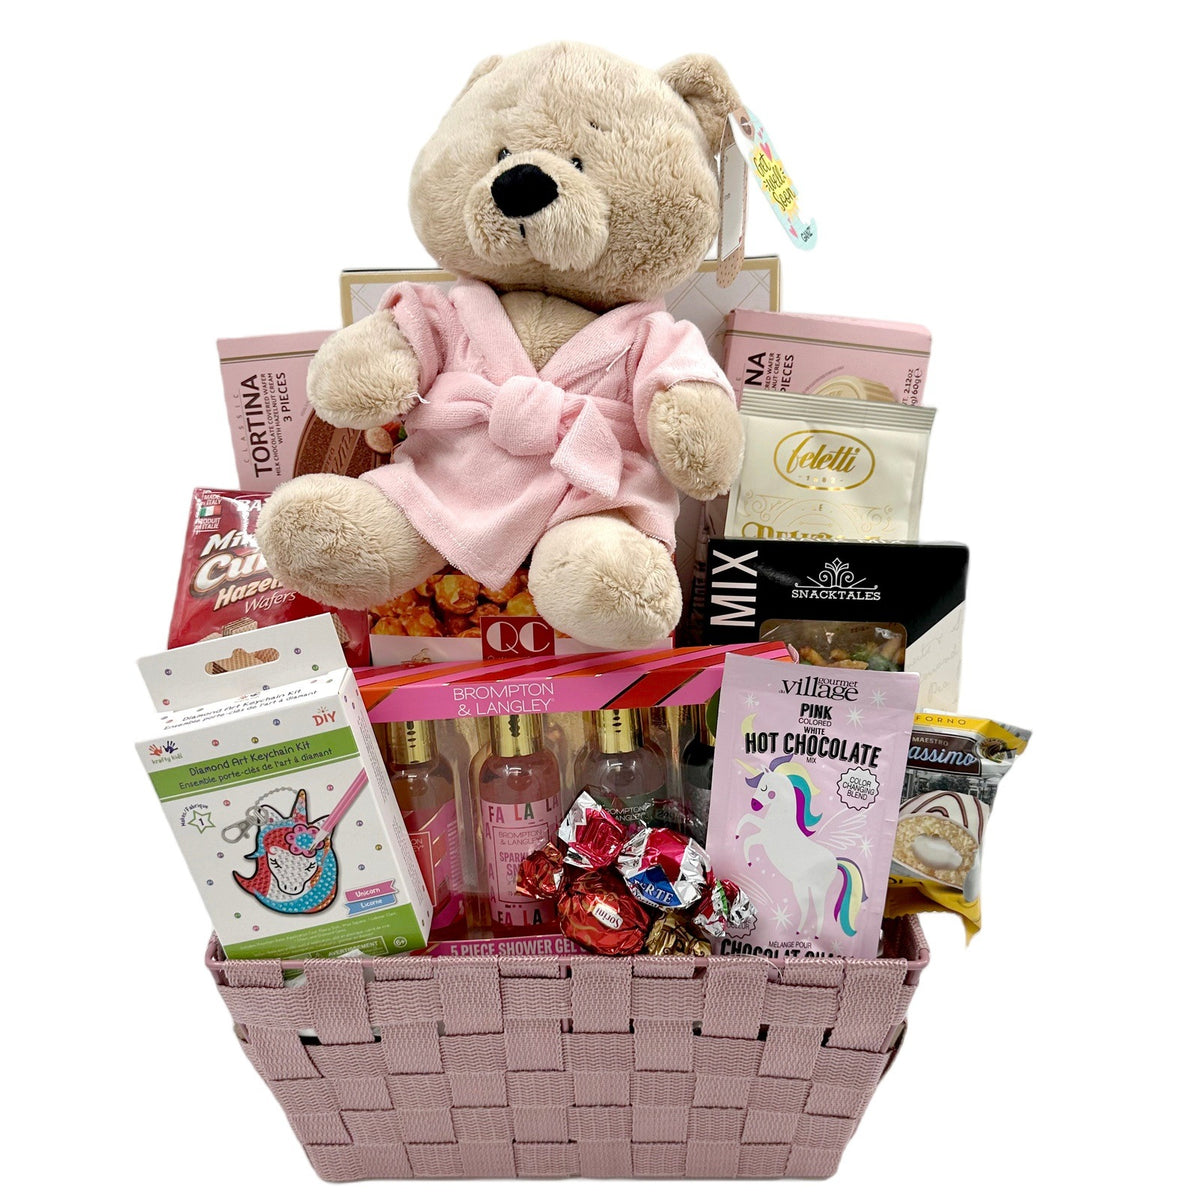 Cheerful Recovery: Kid's Delight Get Well Basket